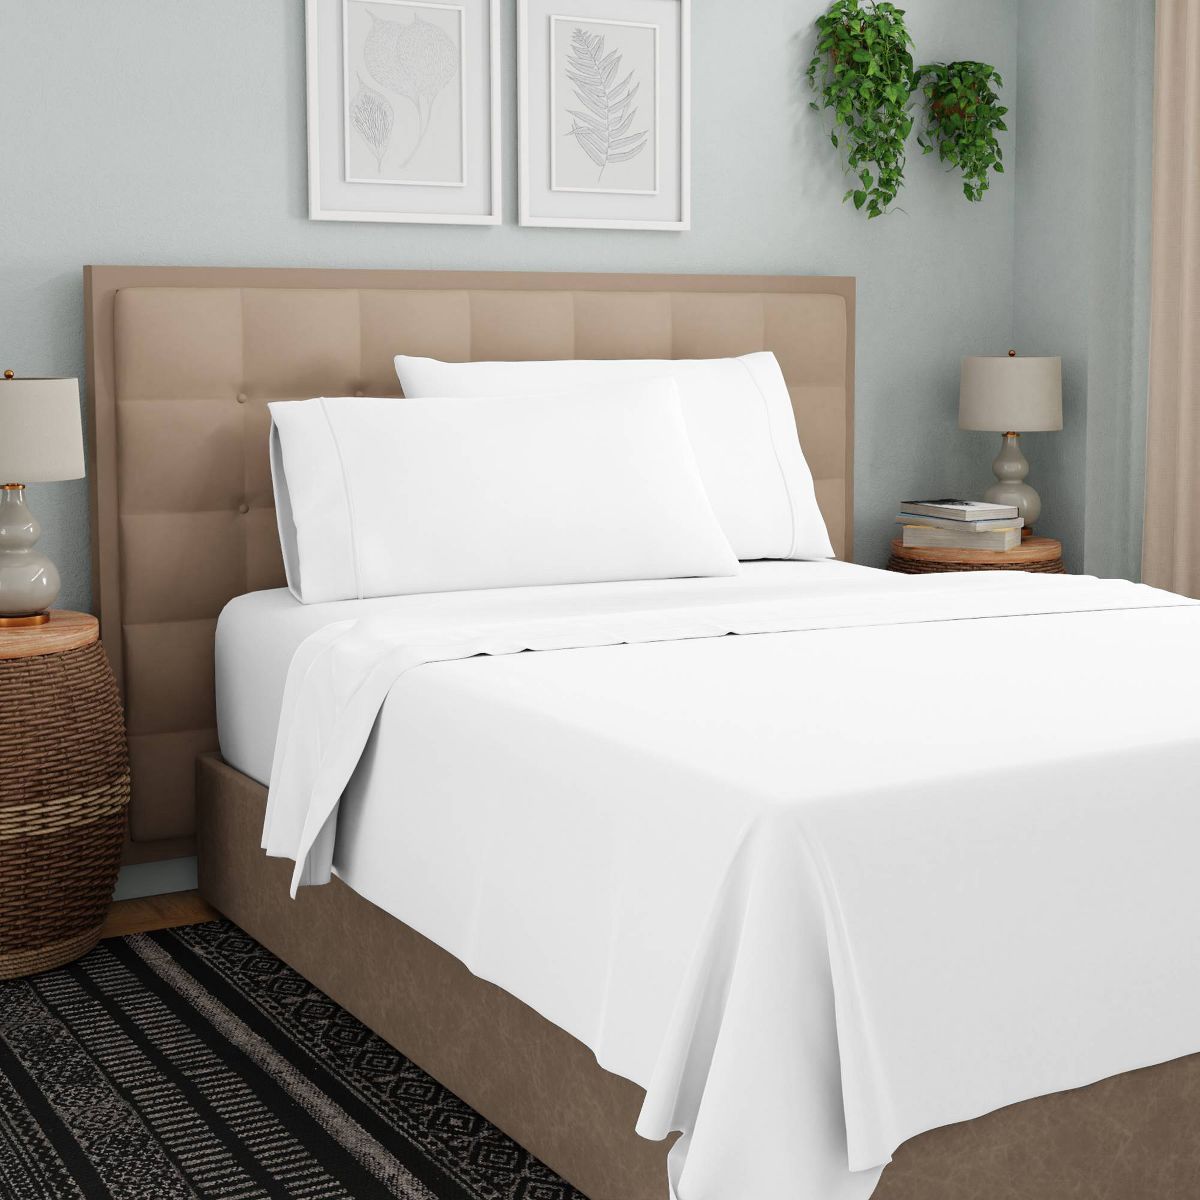 300 Thread Count Organic Cotton Brushed Percale Sheet Set - Purity Home | Target